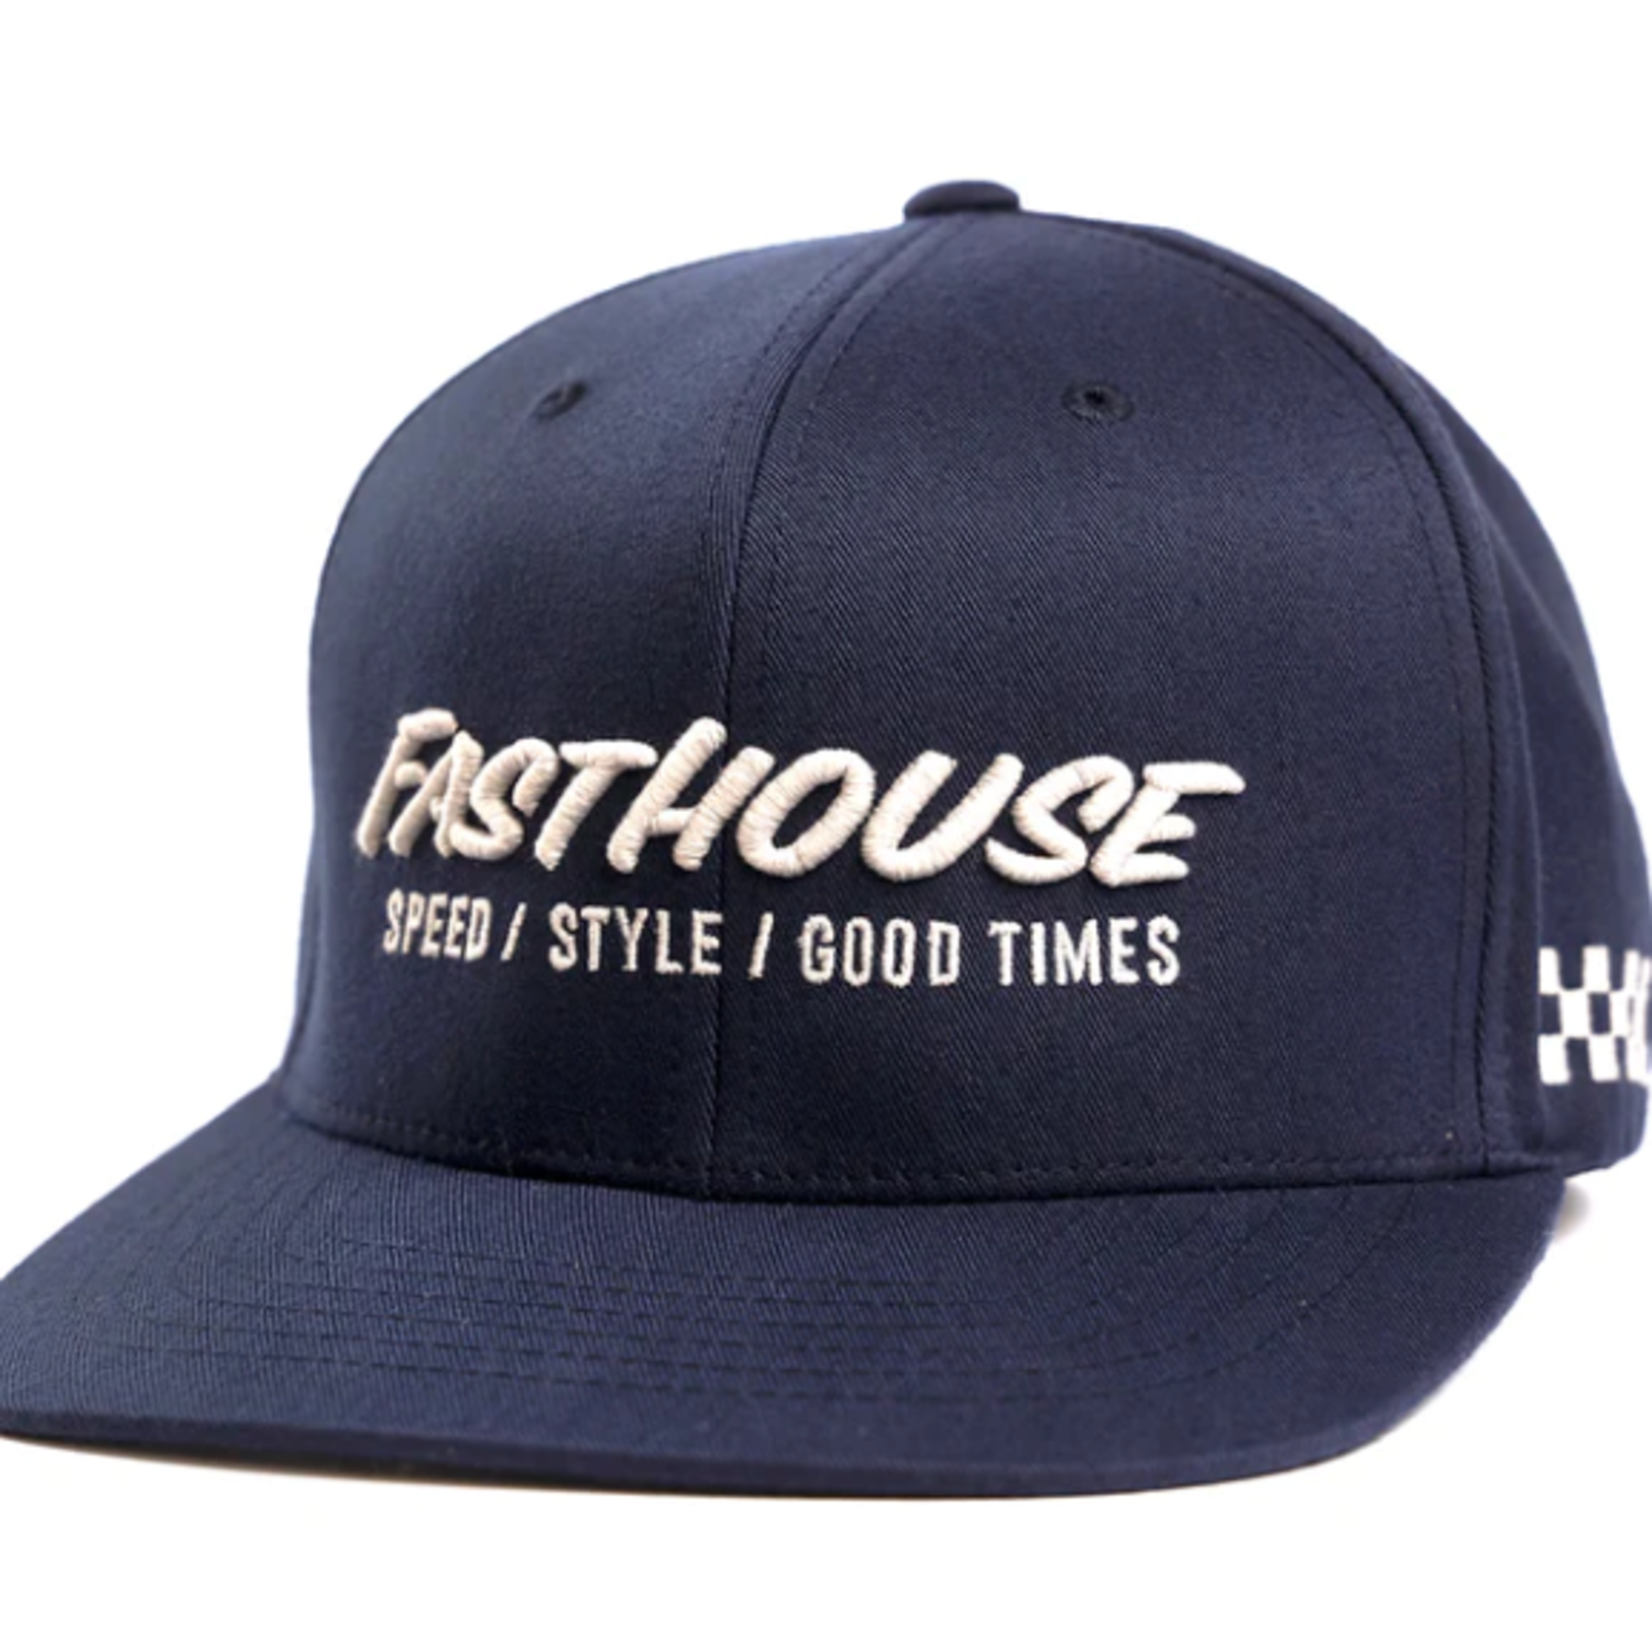 FASTHOUSE CLASSIC FITTED HAT, NAVY - LG/XL